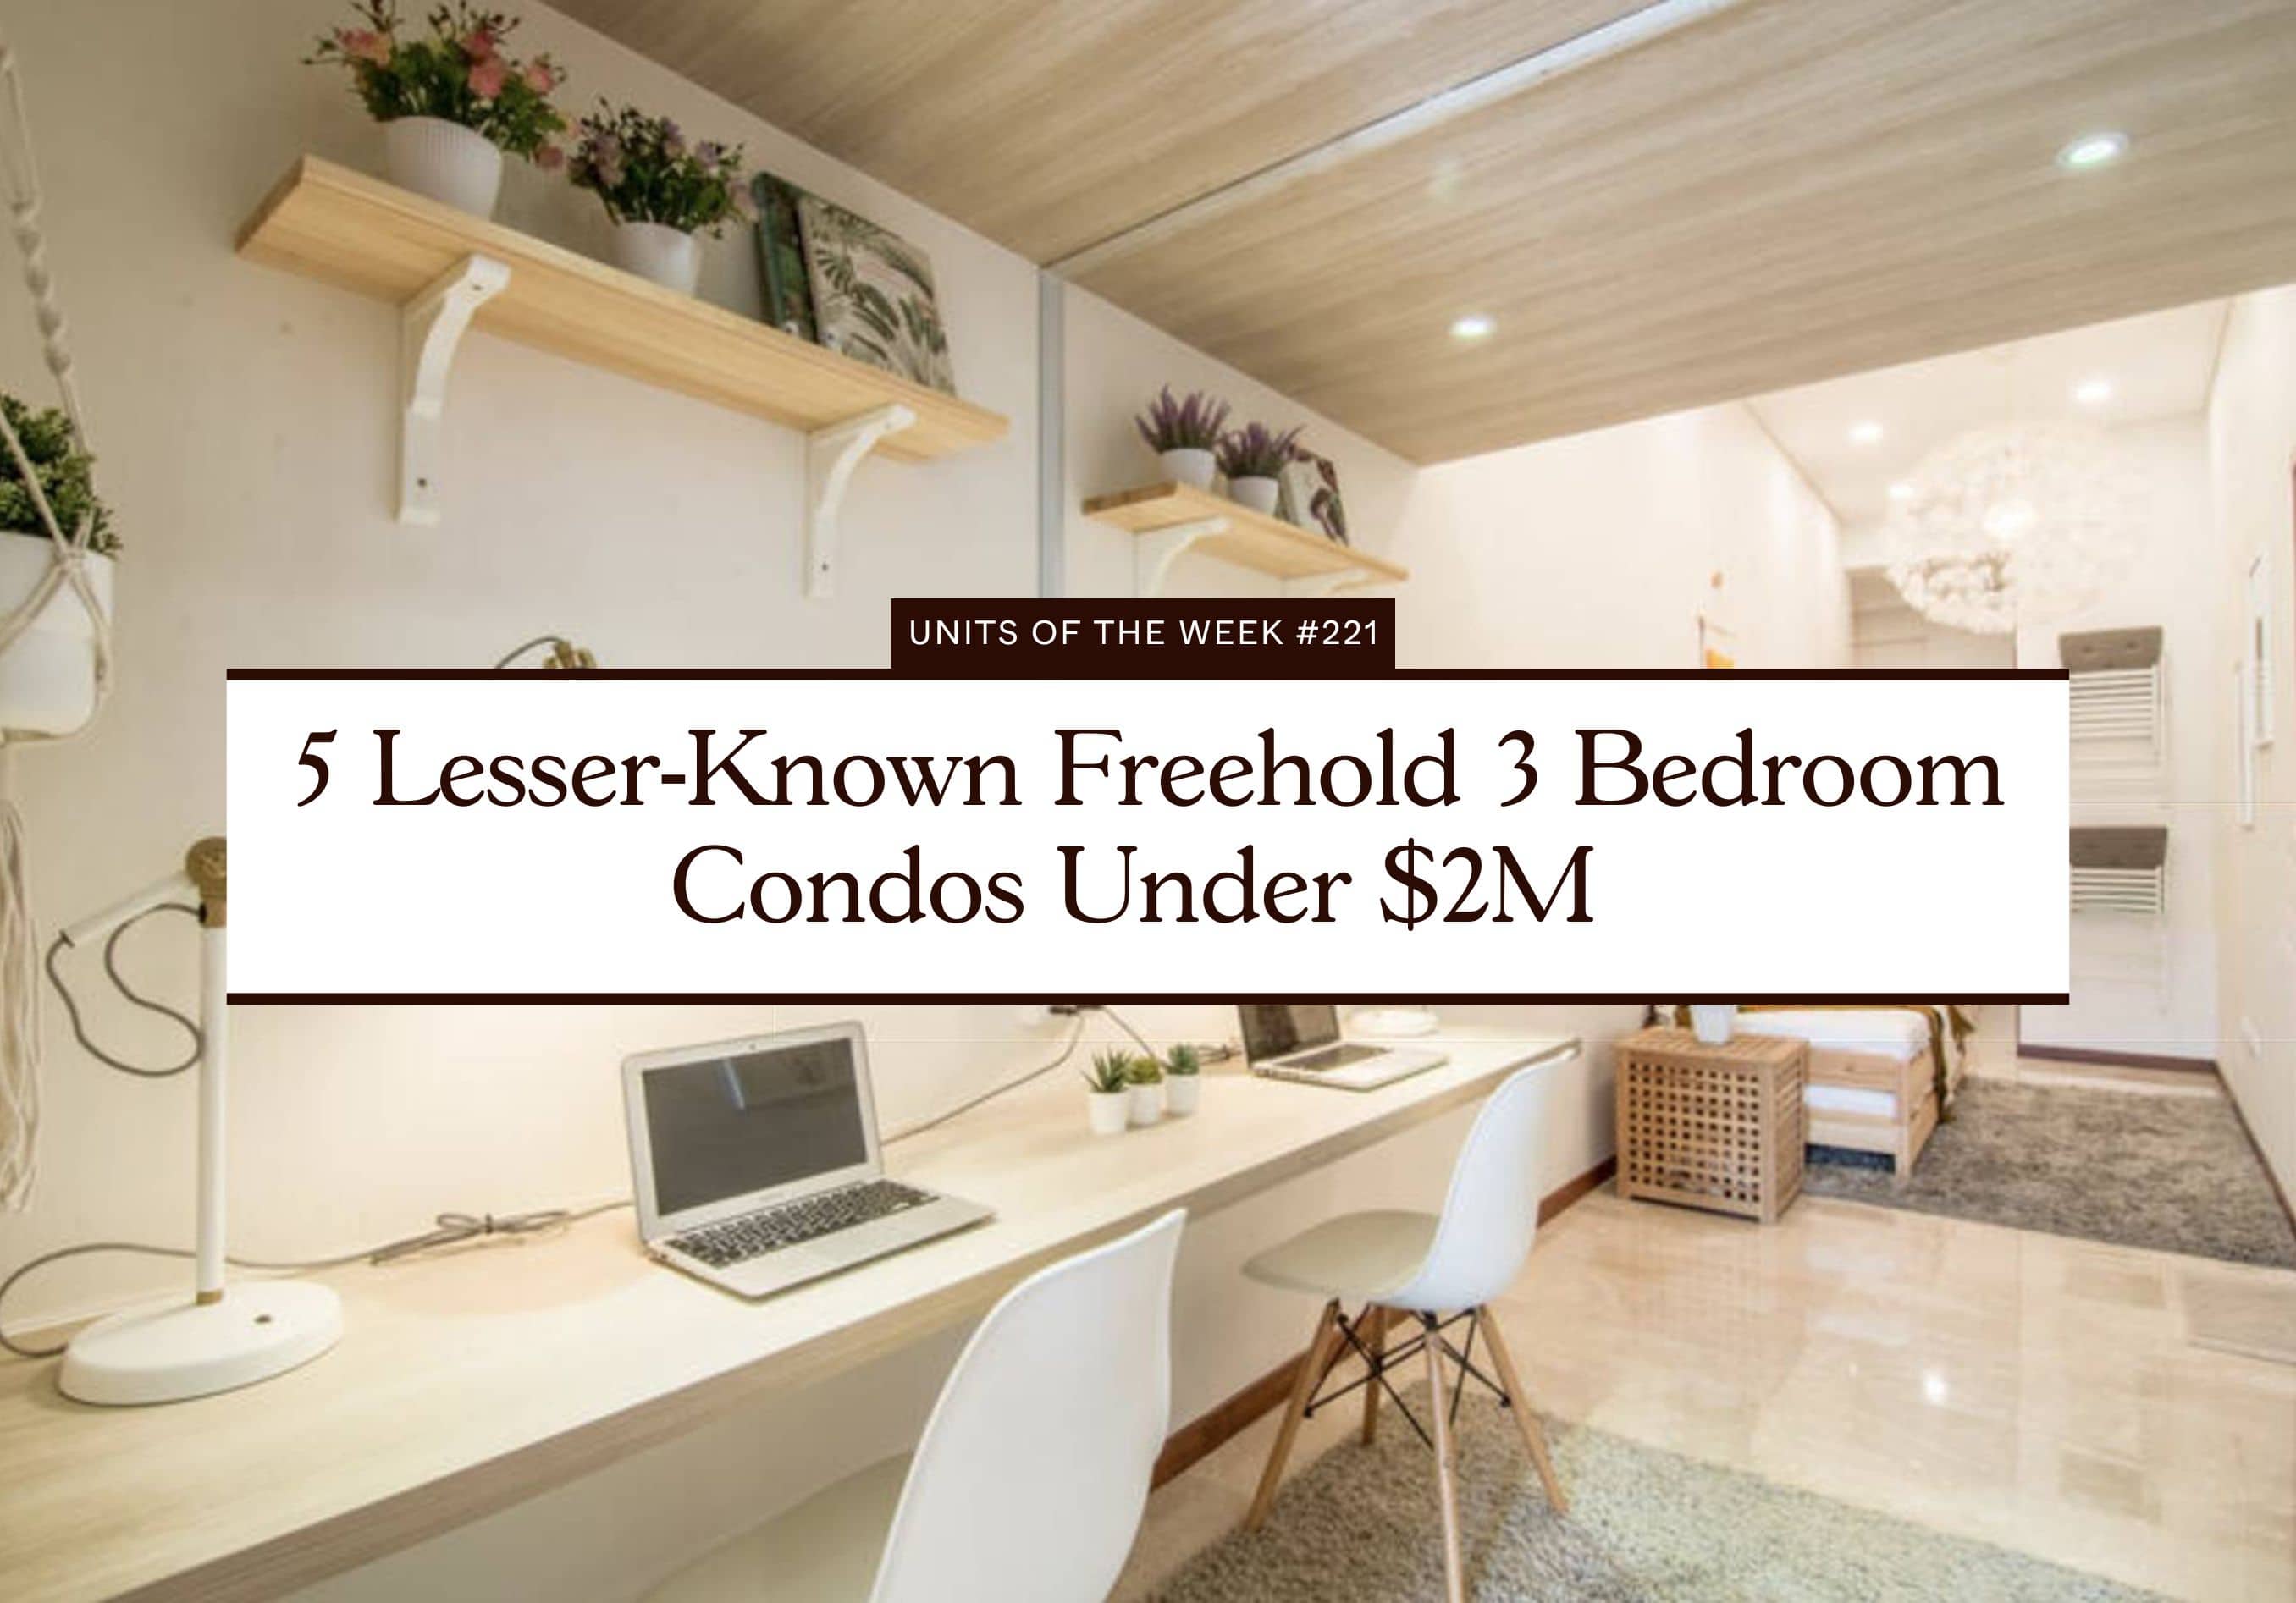 5 Lesser Known Freehold 3 Bedroom Condos Under $2M